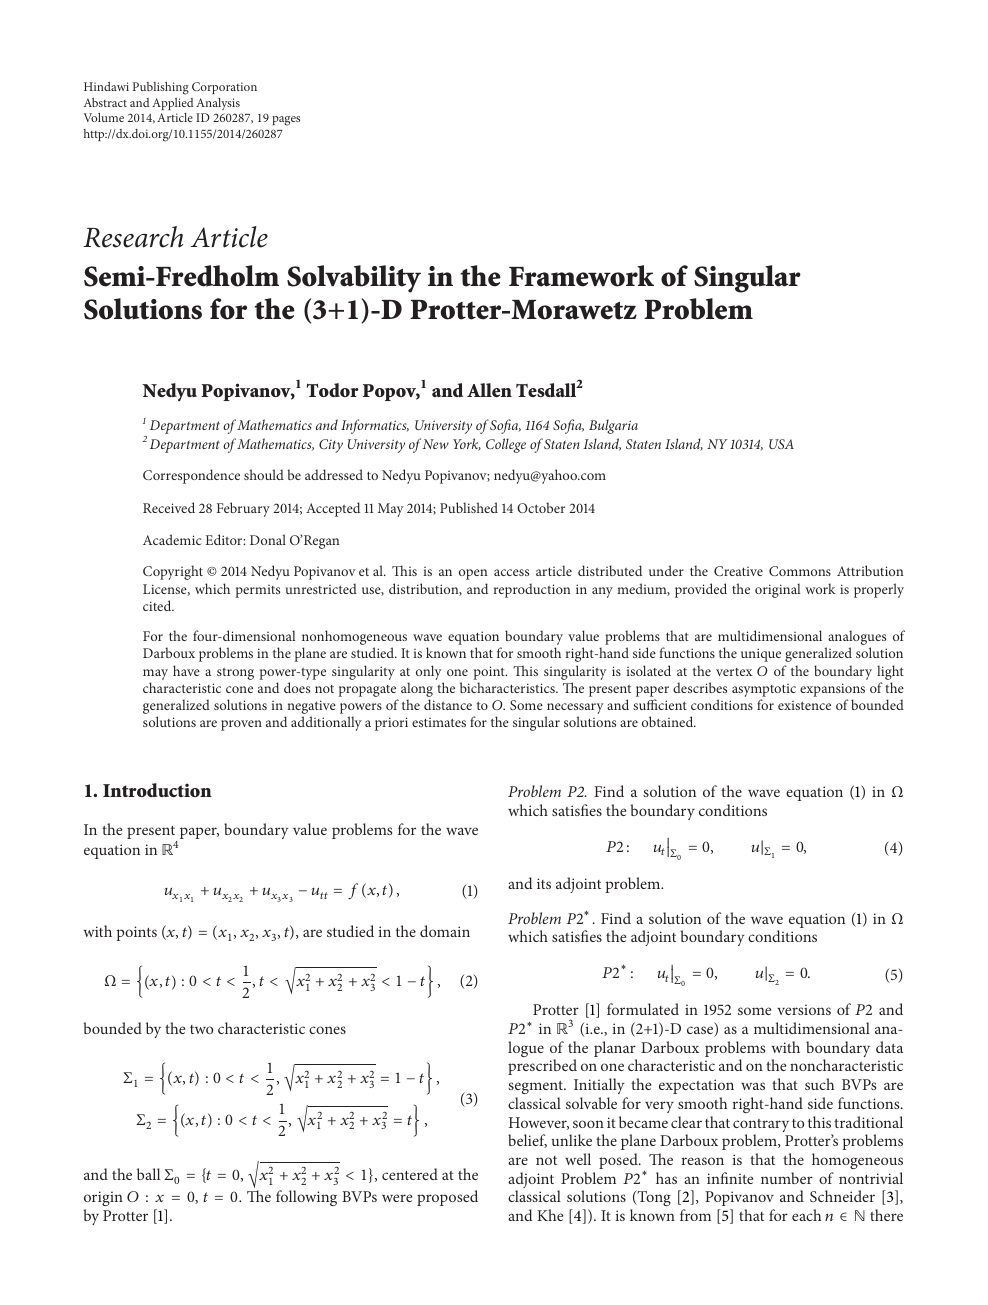 Semi Fredholm Solvability In The Framework Of Singular Solutions For The 3 1 D Protter Morawetz Problem Topic Of Research Paper In Mathematics Download Scholarly Article Pdf And Read For Free On Cyberleninka Open Science